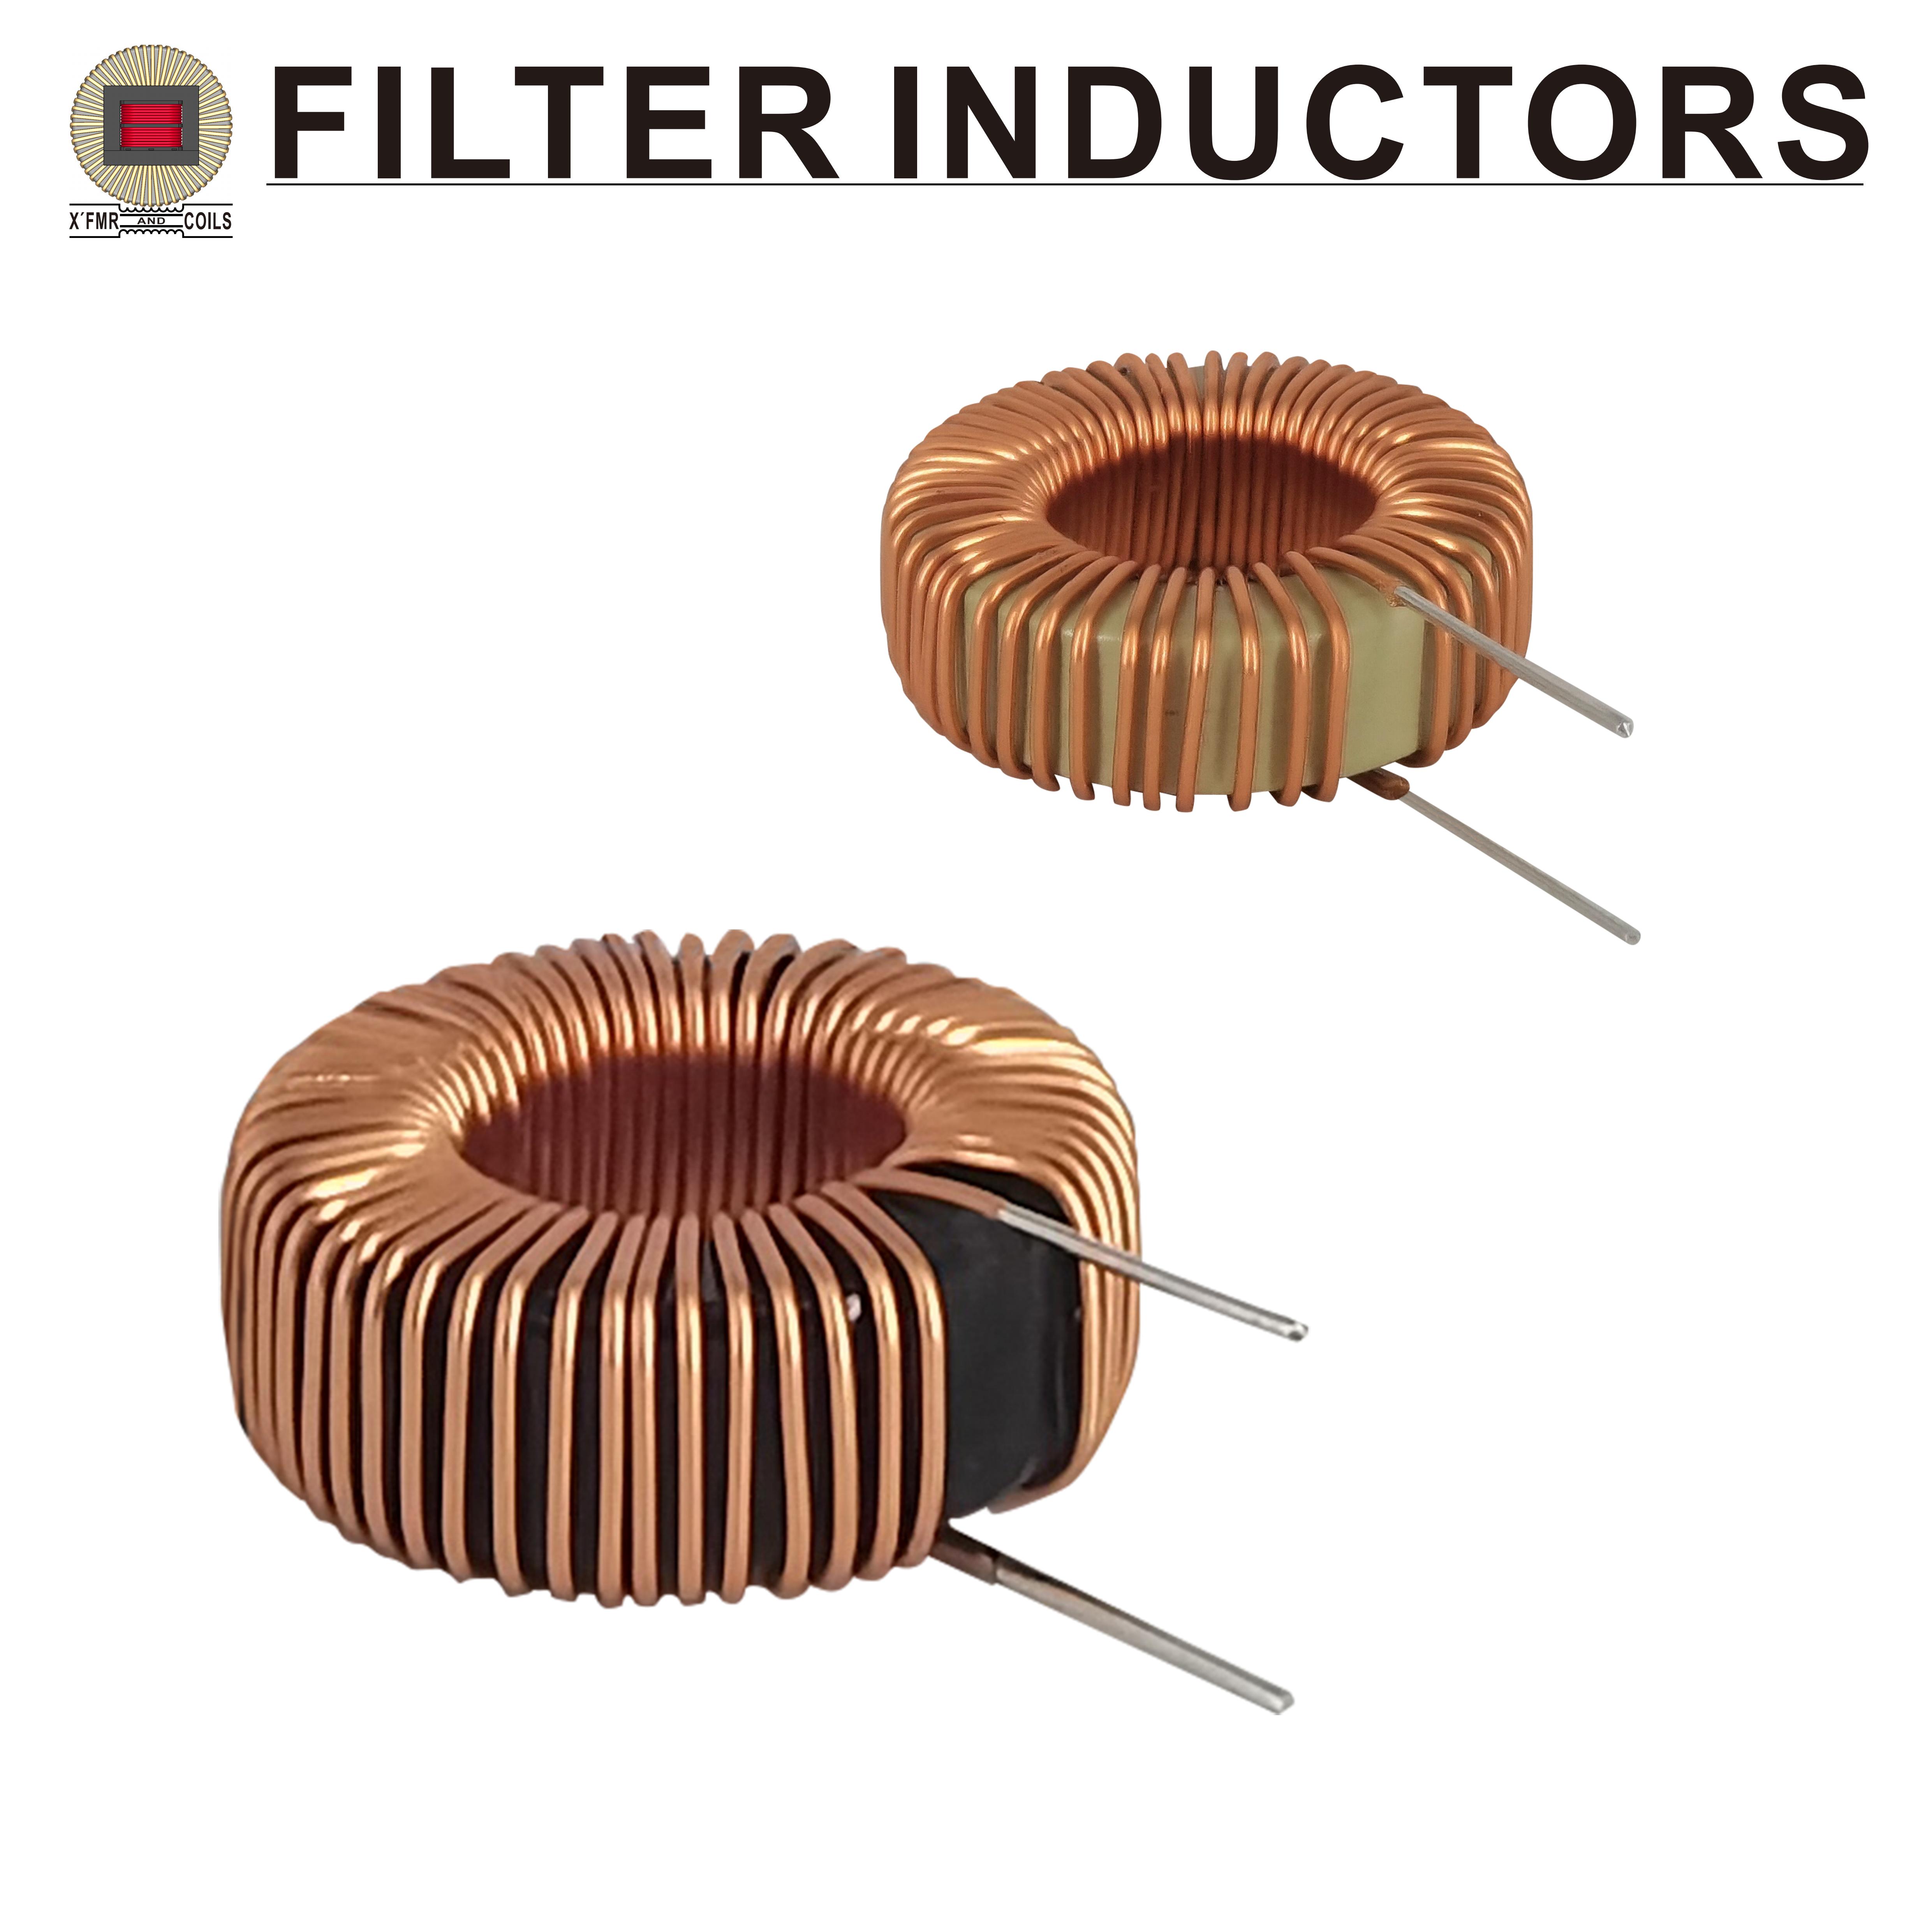 Filter Inductors FI-02 Series